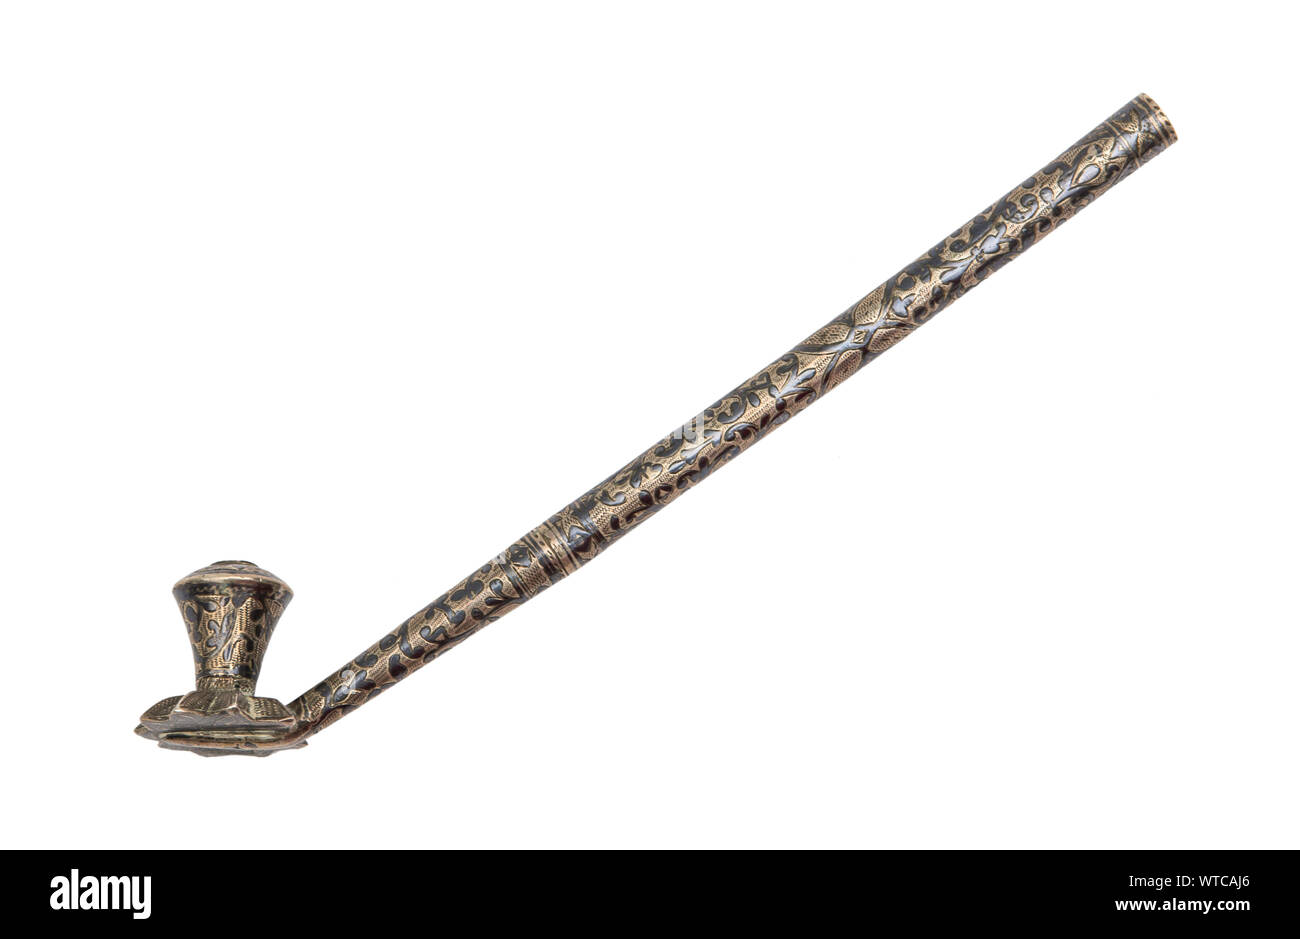 Caucasian smoking pipe of the 19th century made of solid silver decorated with niello work. Stock Photo